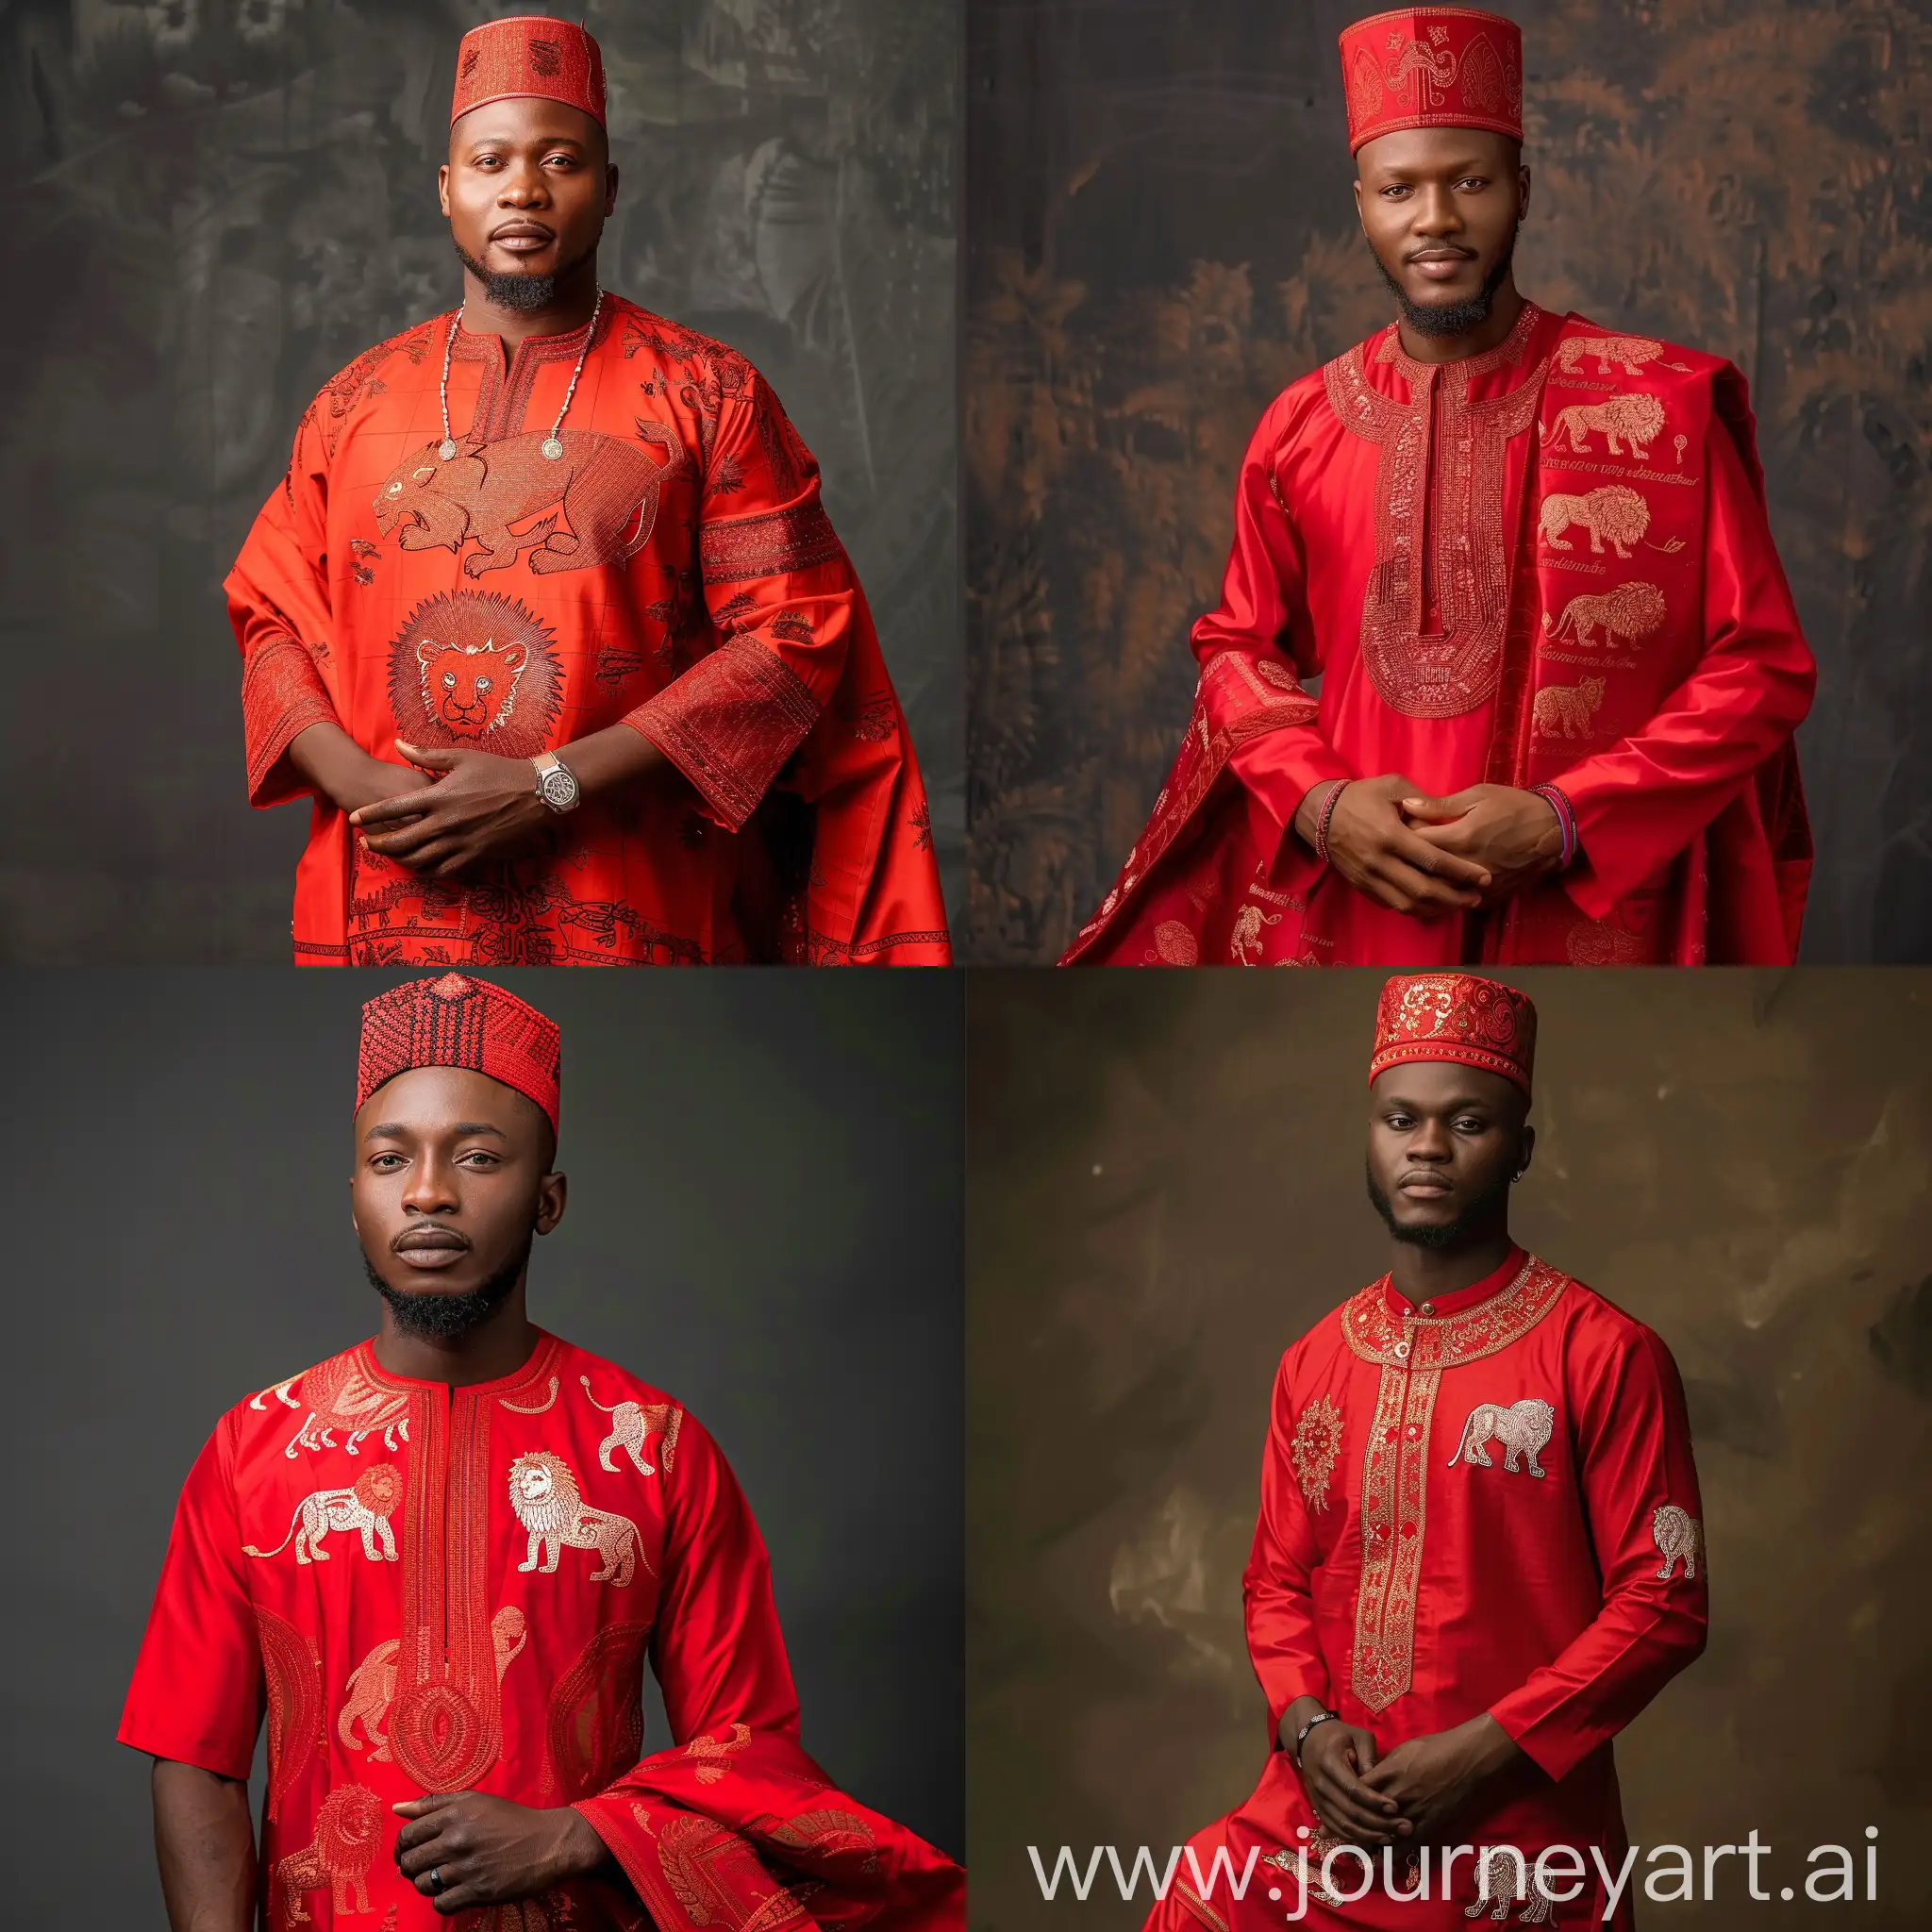 Igbo man dressed in red traditional attire with engraved lion images